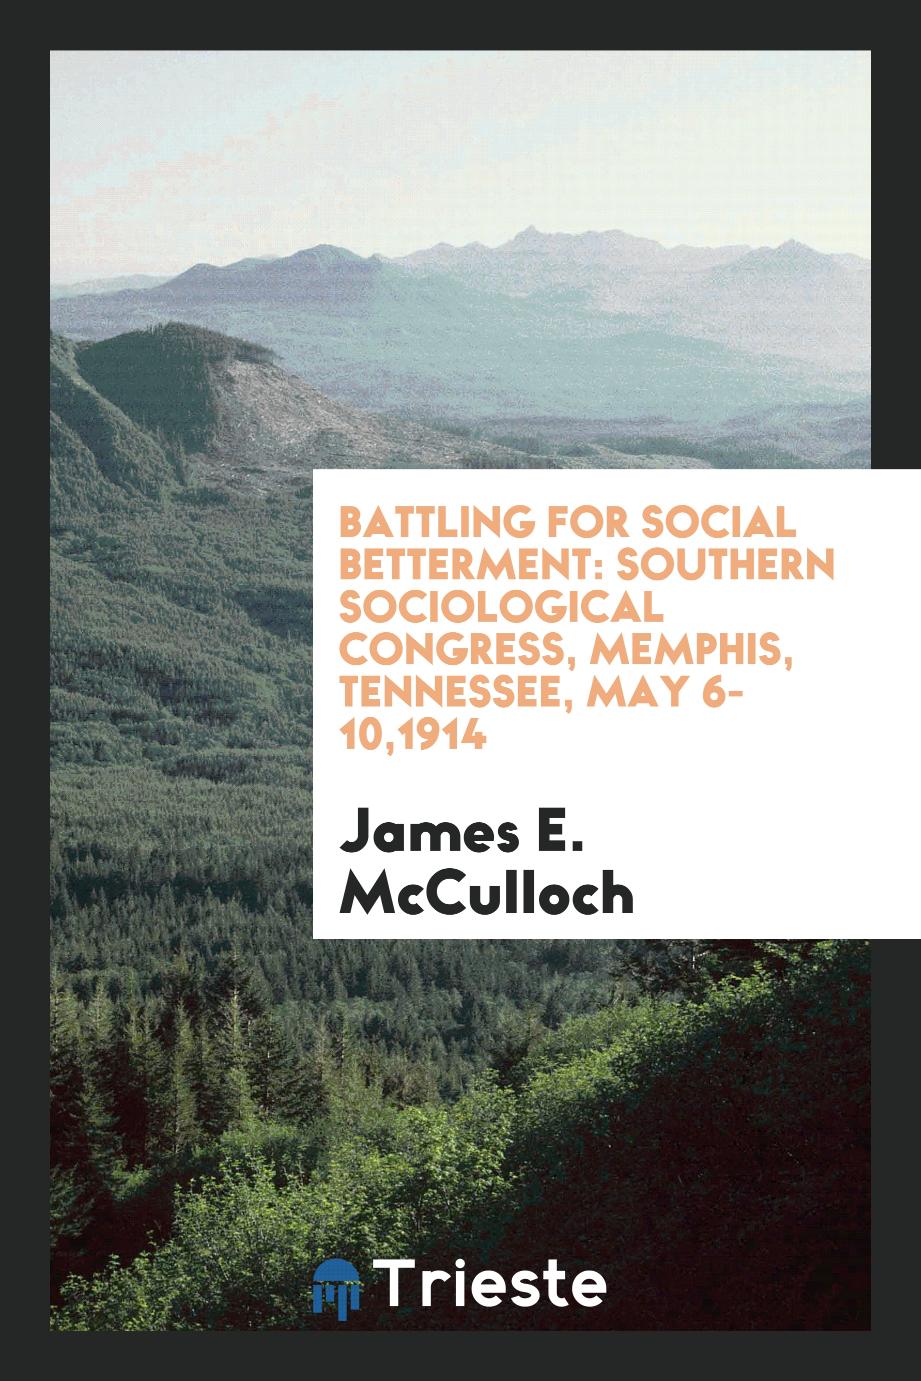 Battling for Social Betterment: Southern Sociological Congress, Memphis, Tennessee, May 6-10,1914